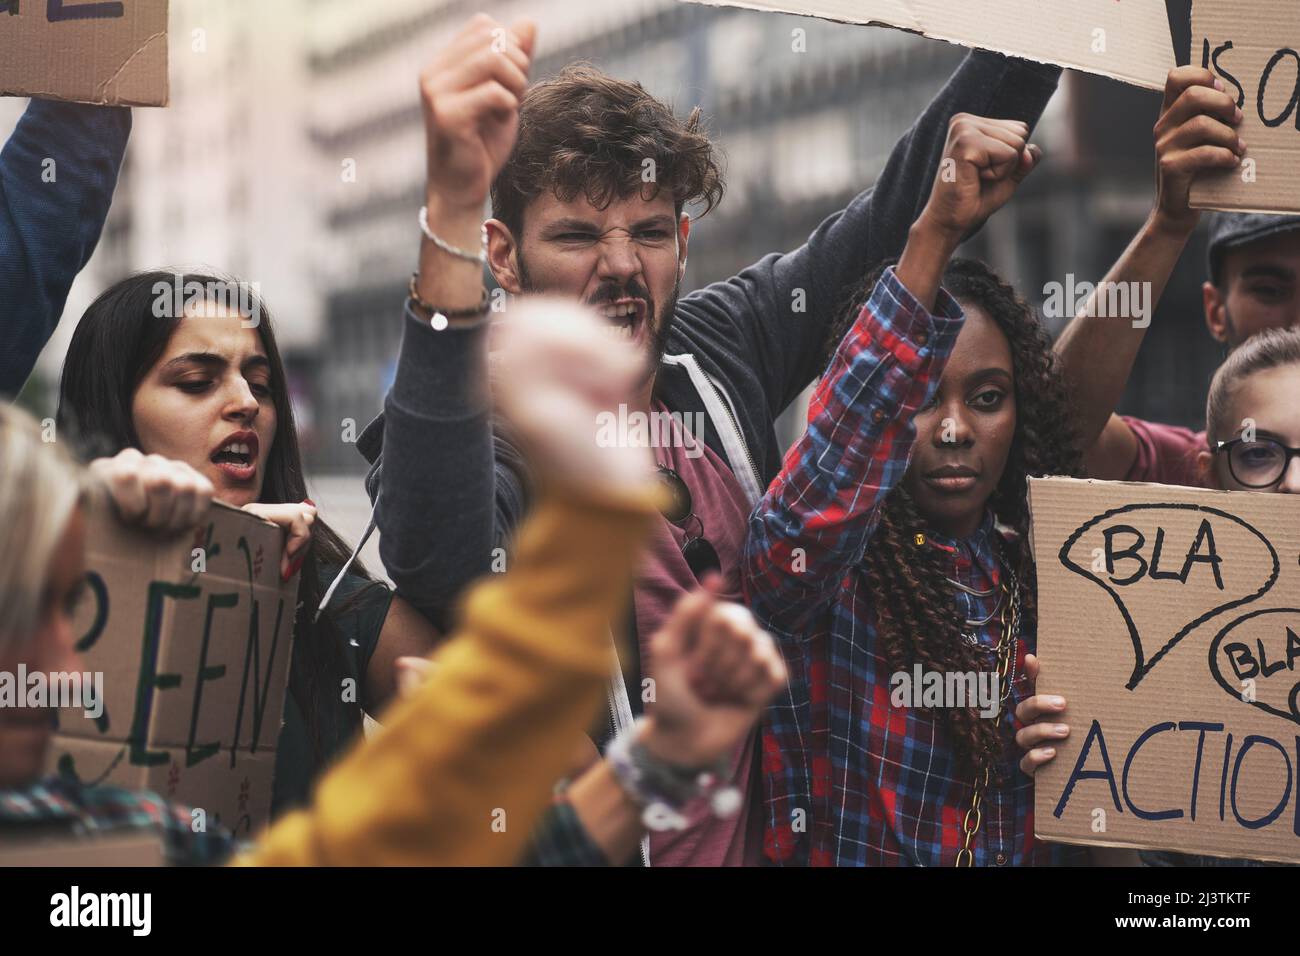 Students screaming at protest for human rights outdoors in smoke. Group of people protesting at street. Strike against politics and government. Stock Photo